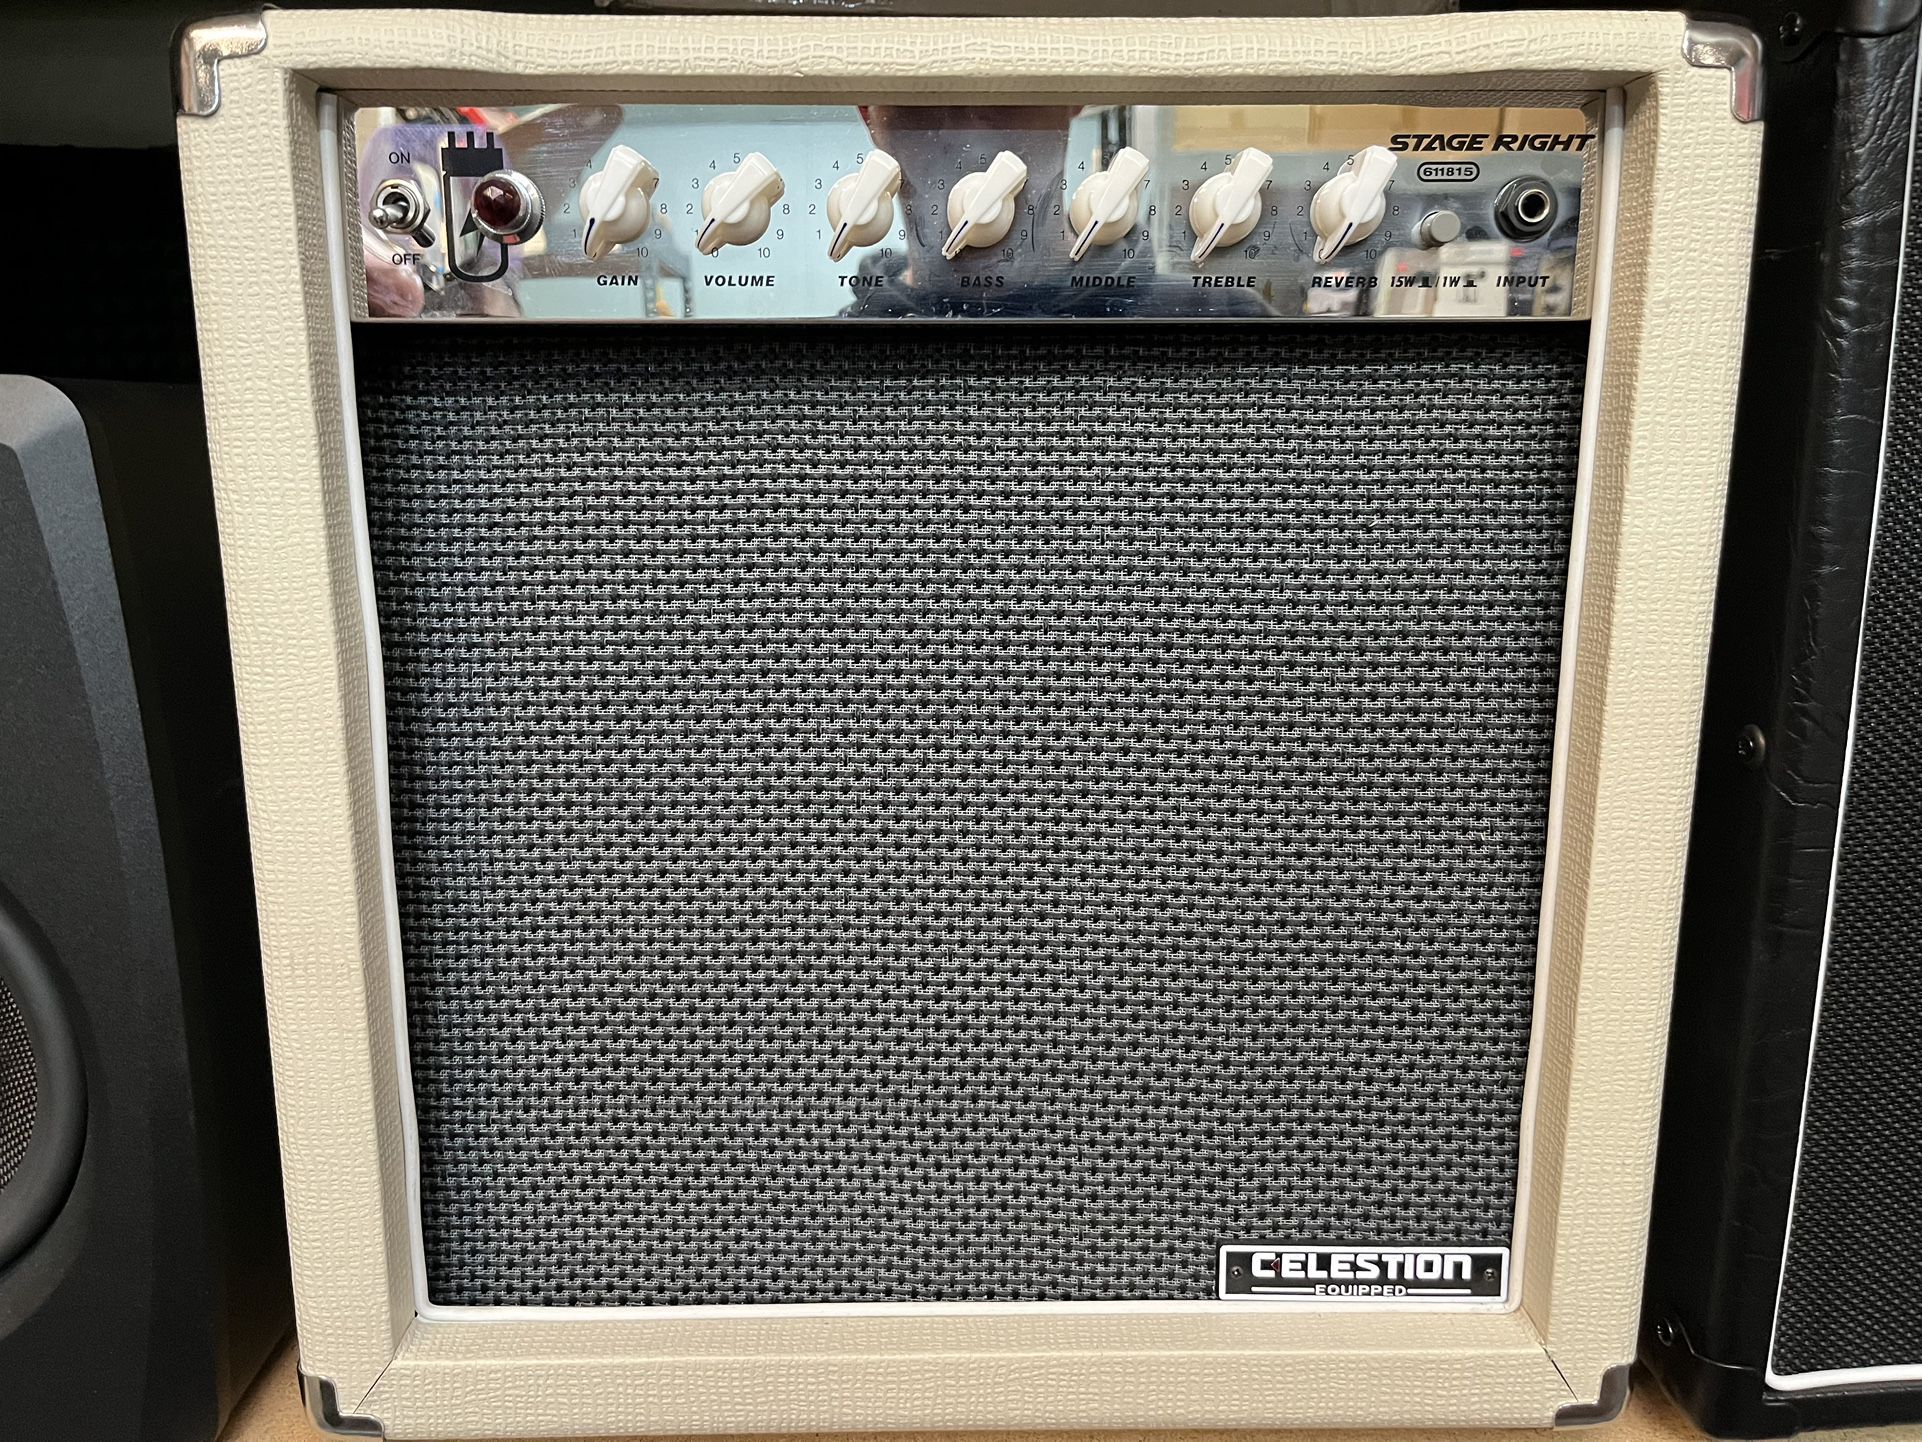 Stage Right Guitar Amplifier